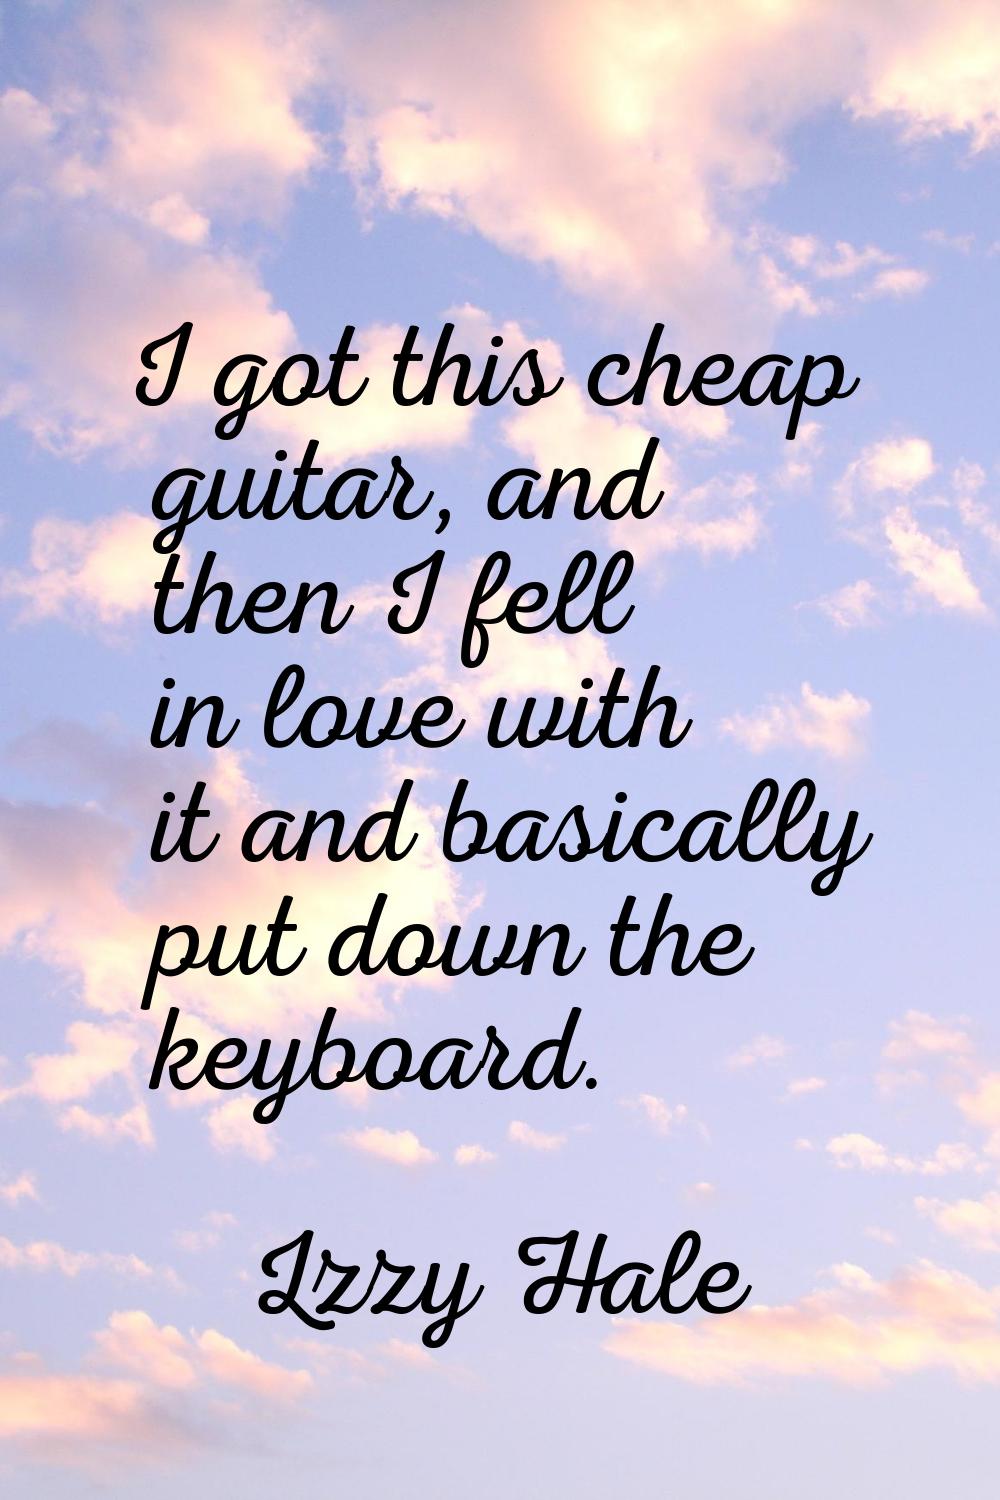 I got this cheap guitar, and then I fell in love with it and basically put down the keyboard.